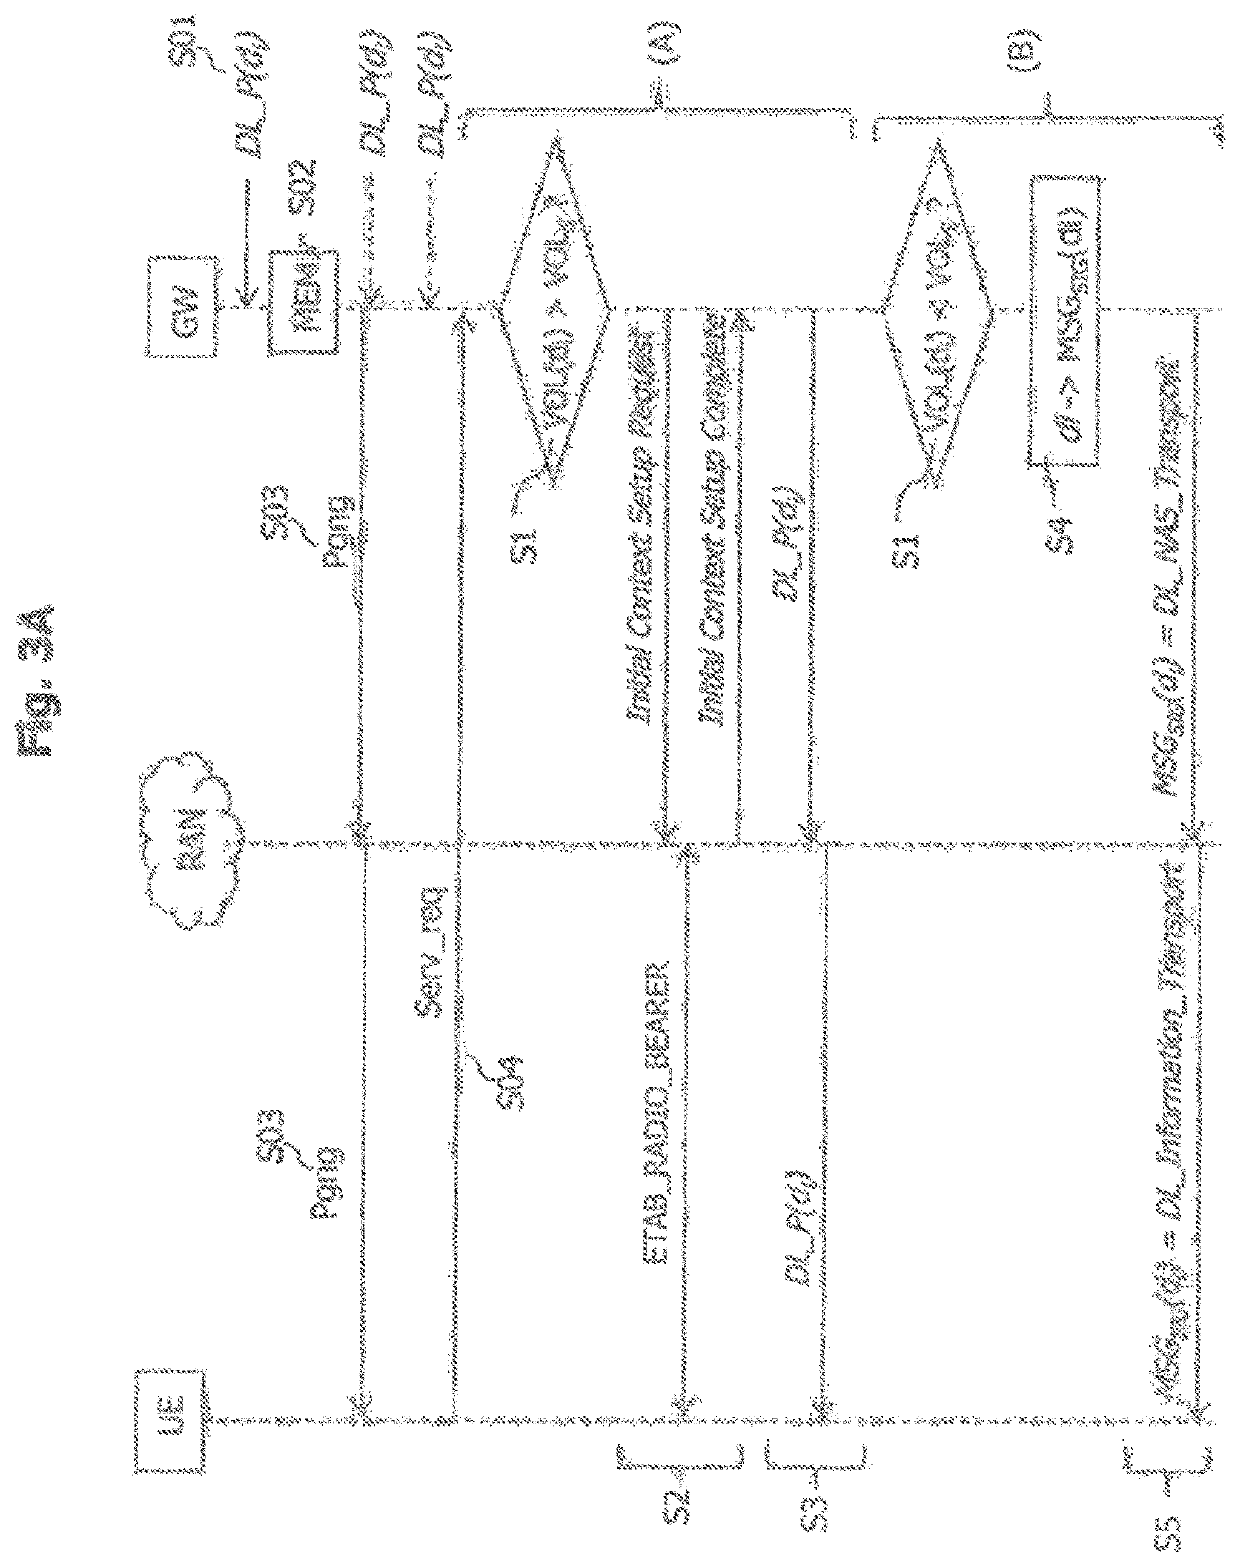 Variable volume data transmission in a mobile communication network